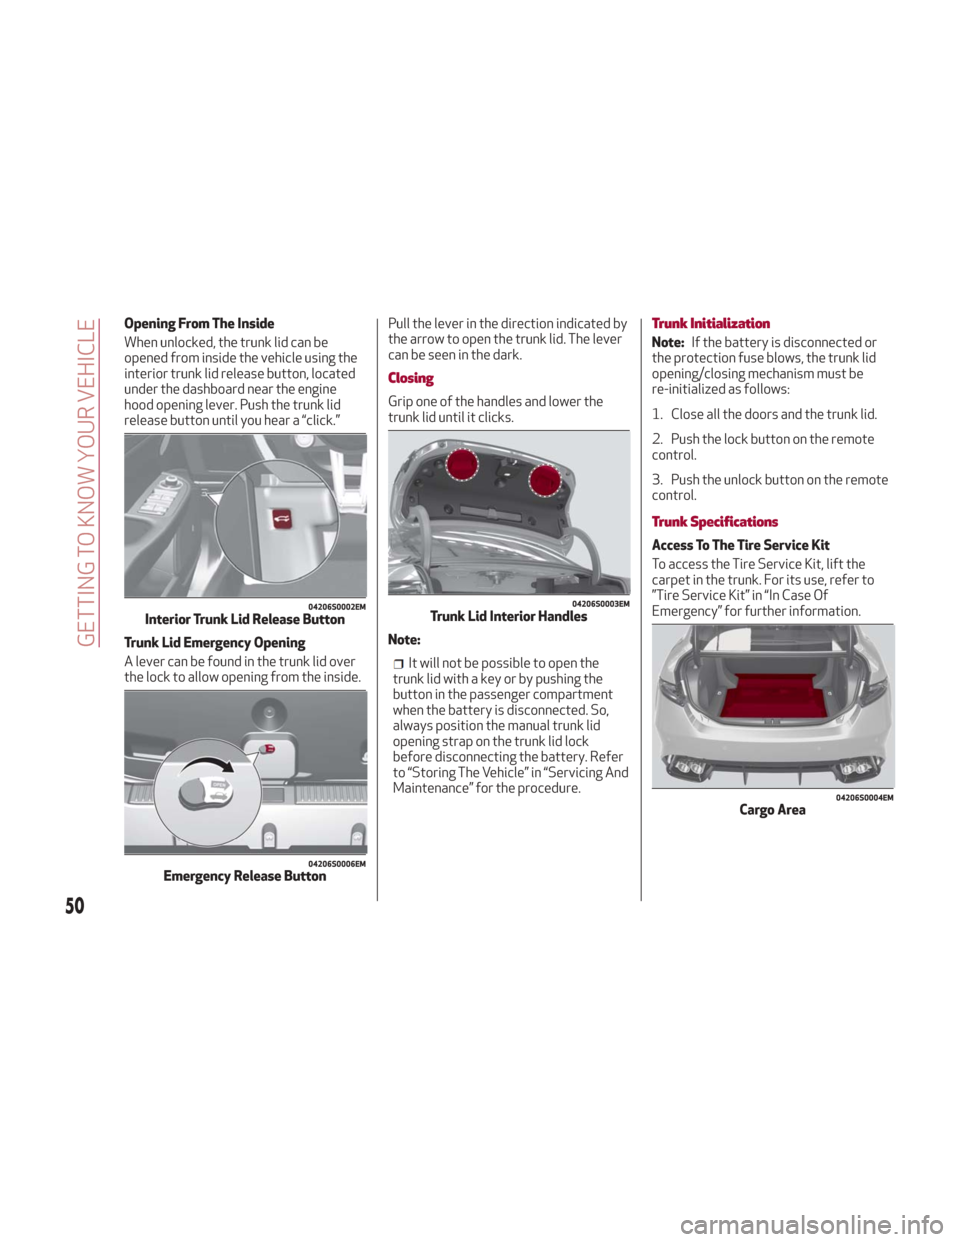 Alfa Romeo Giulia 2018  Owners Manual Opening From The Inside
When unlocked, the trunk lid can be
opened from inside the vehicle using the
interior trunk lid release button, located
under the dashboard near the engine
hood opening lever. 